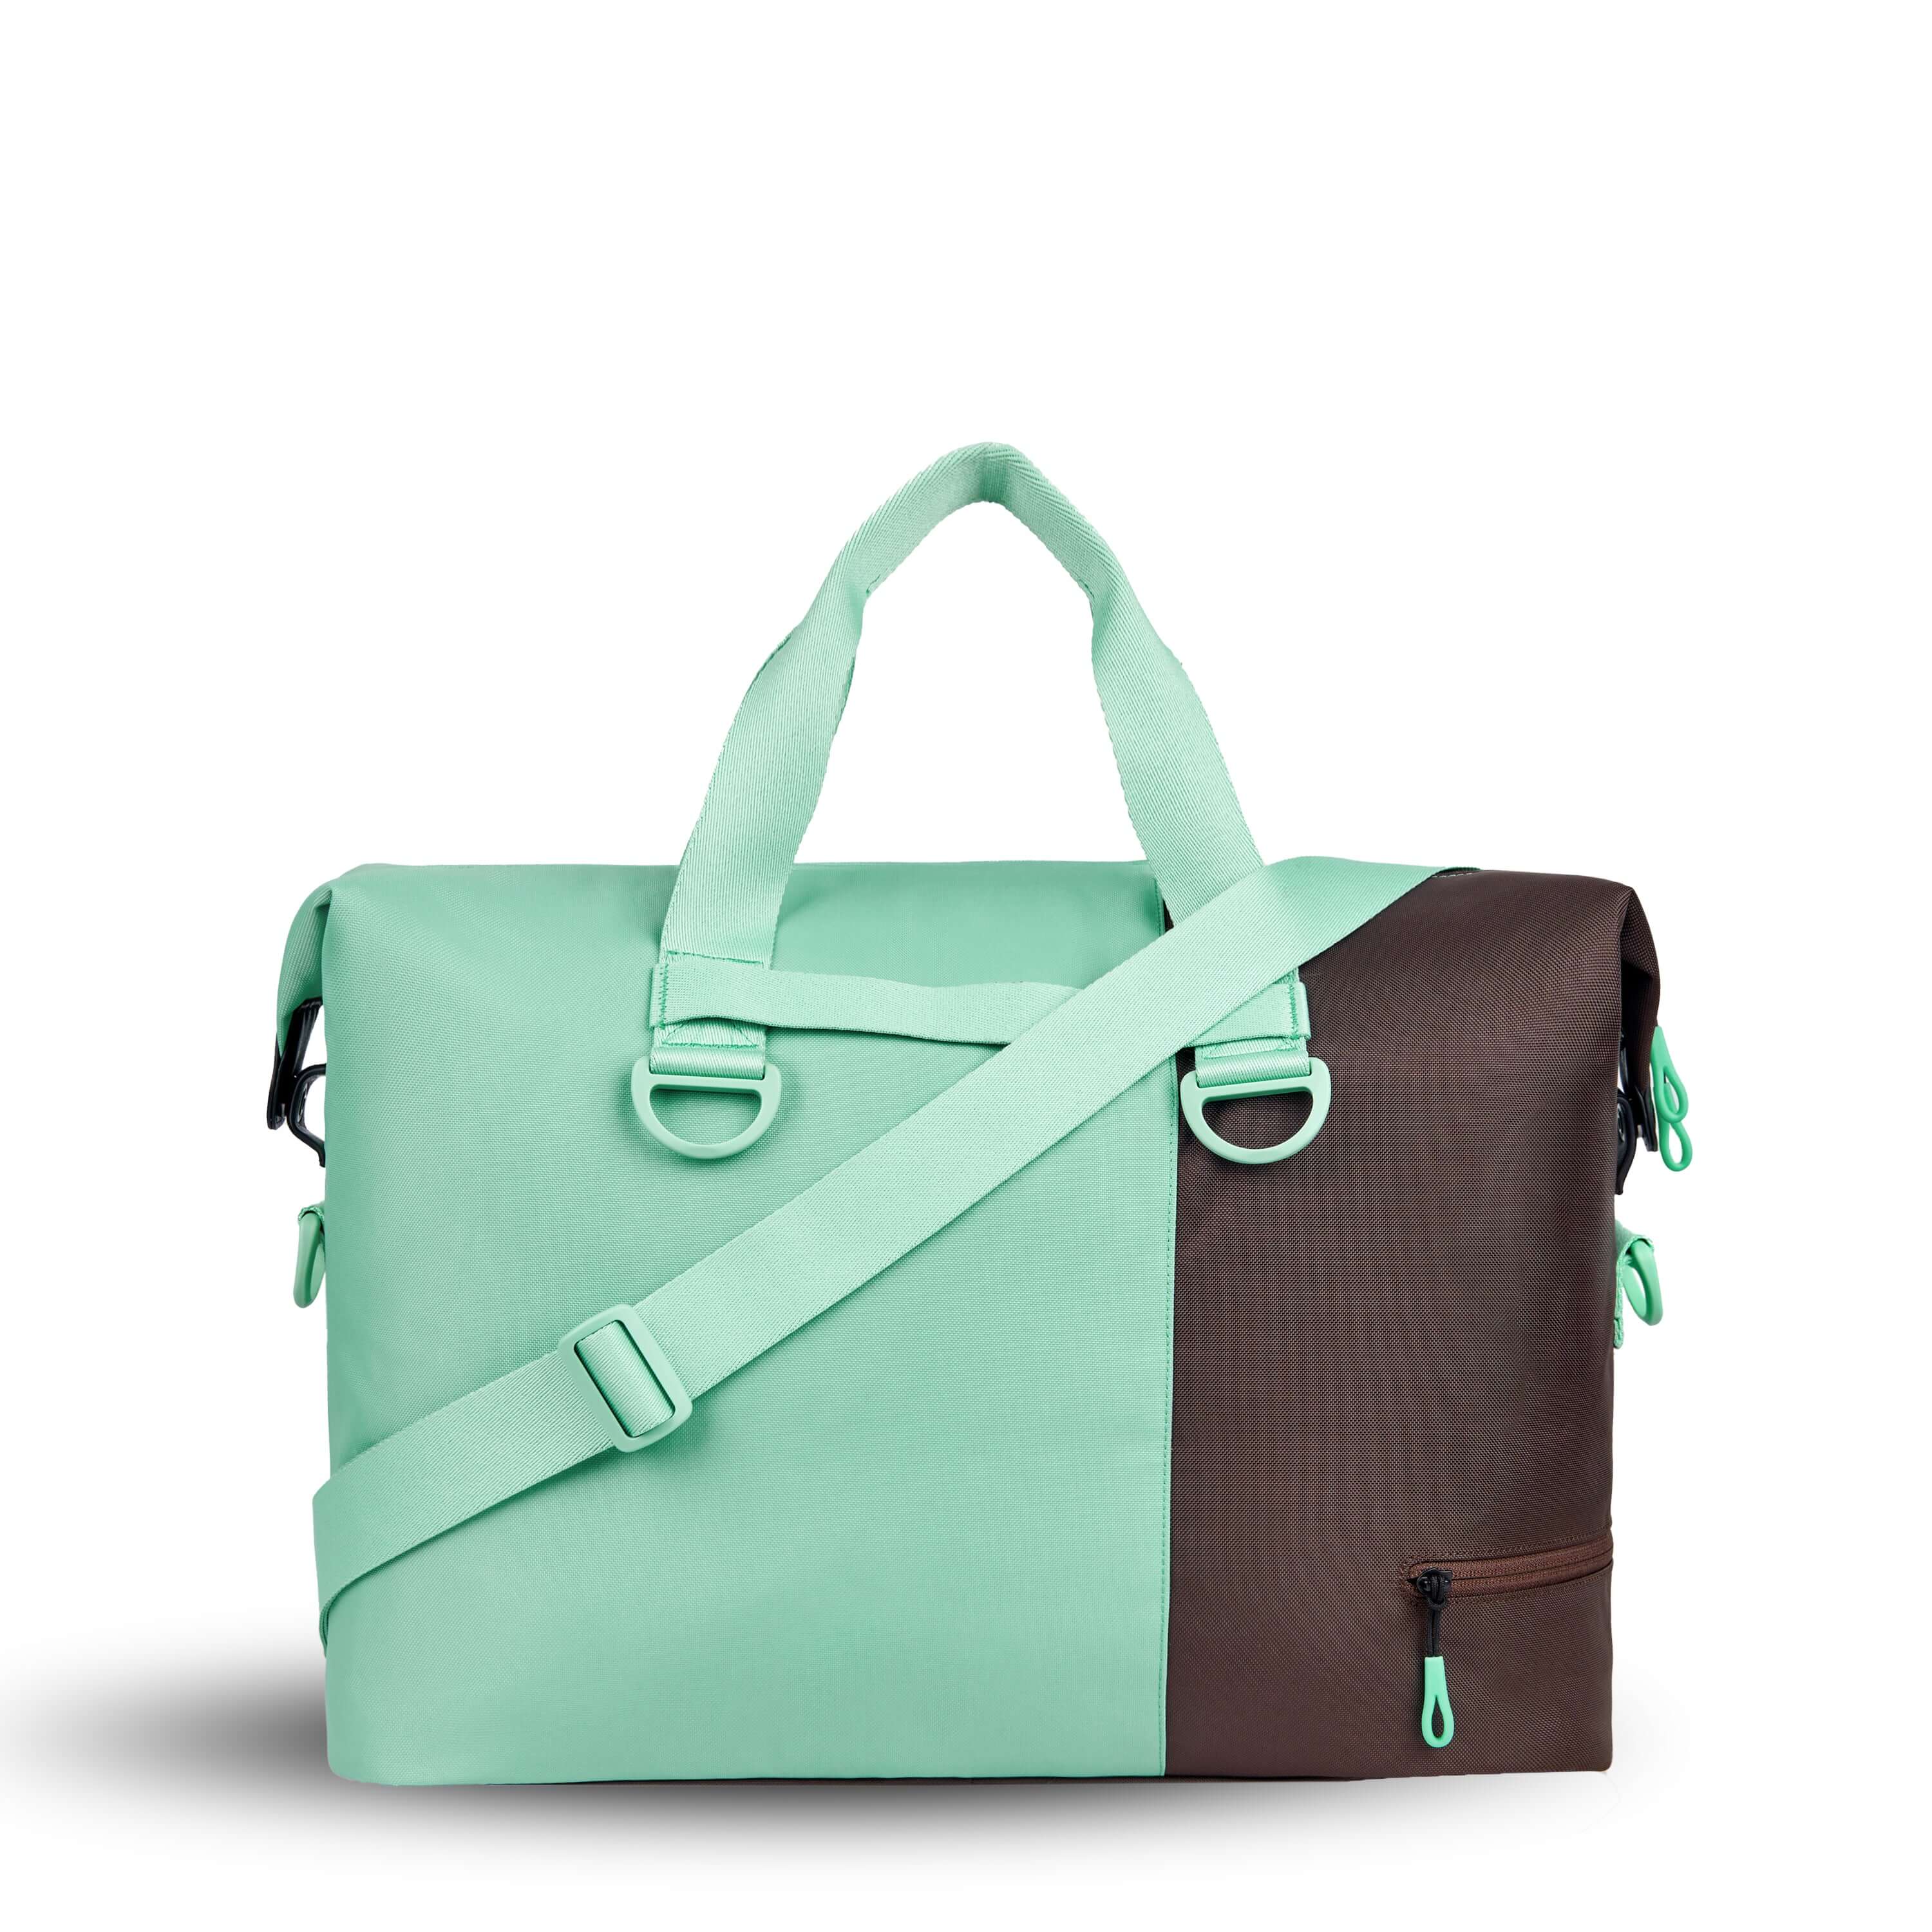 Back view of Sherpani bag, the Sola in Seagreen. The bag is two-toned in light green and brown. Easy-pull zippers are accented in light green. The bag has tote handles and an adjustable/detachable crossbody strap. 